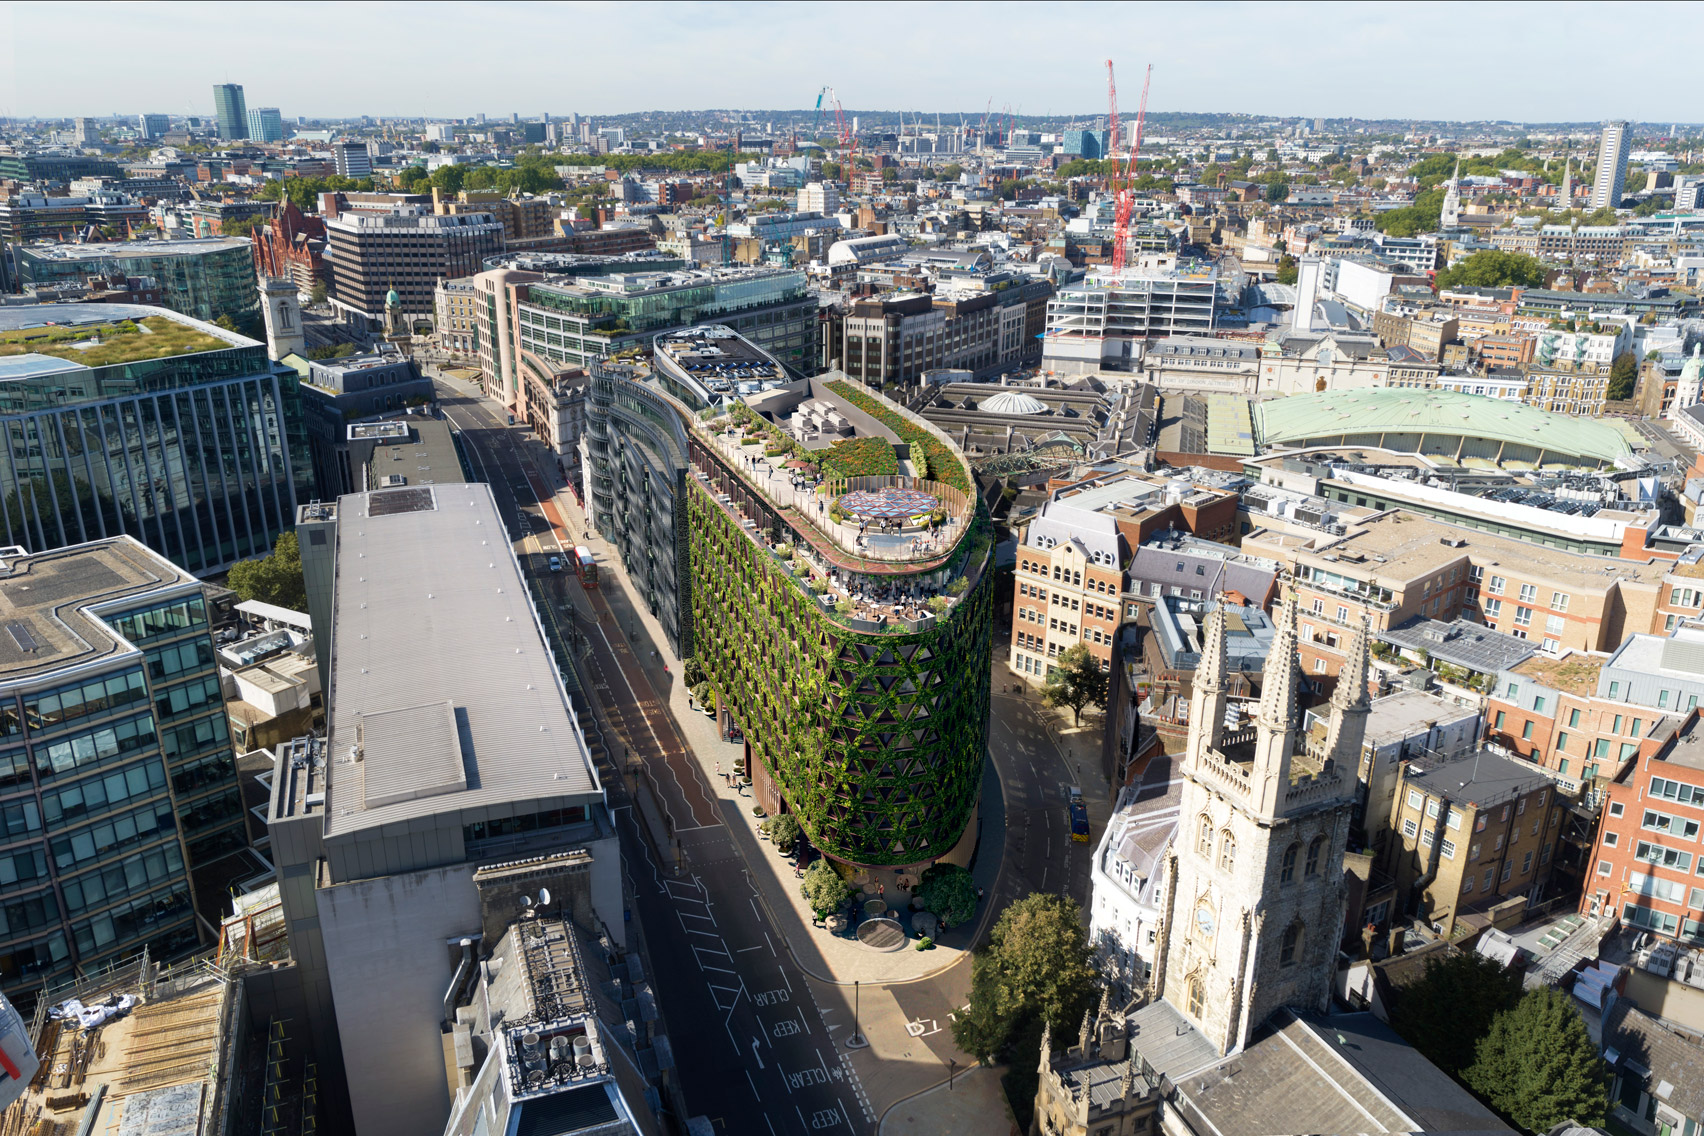 Citicape House with Europe's largest green wall in London by Sheppard Robson